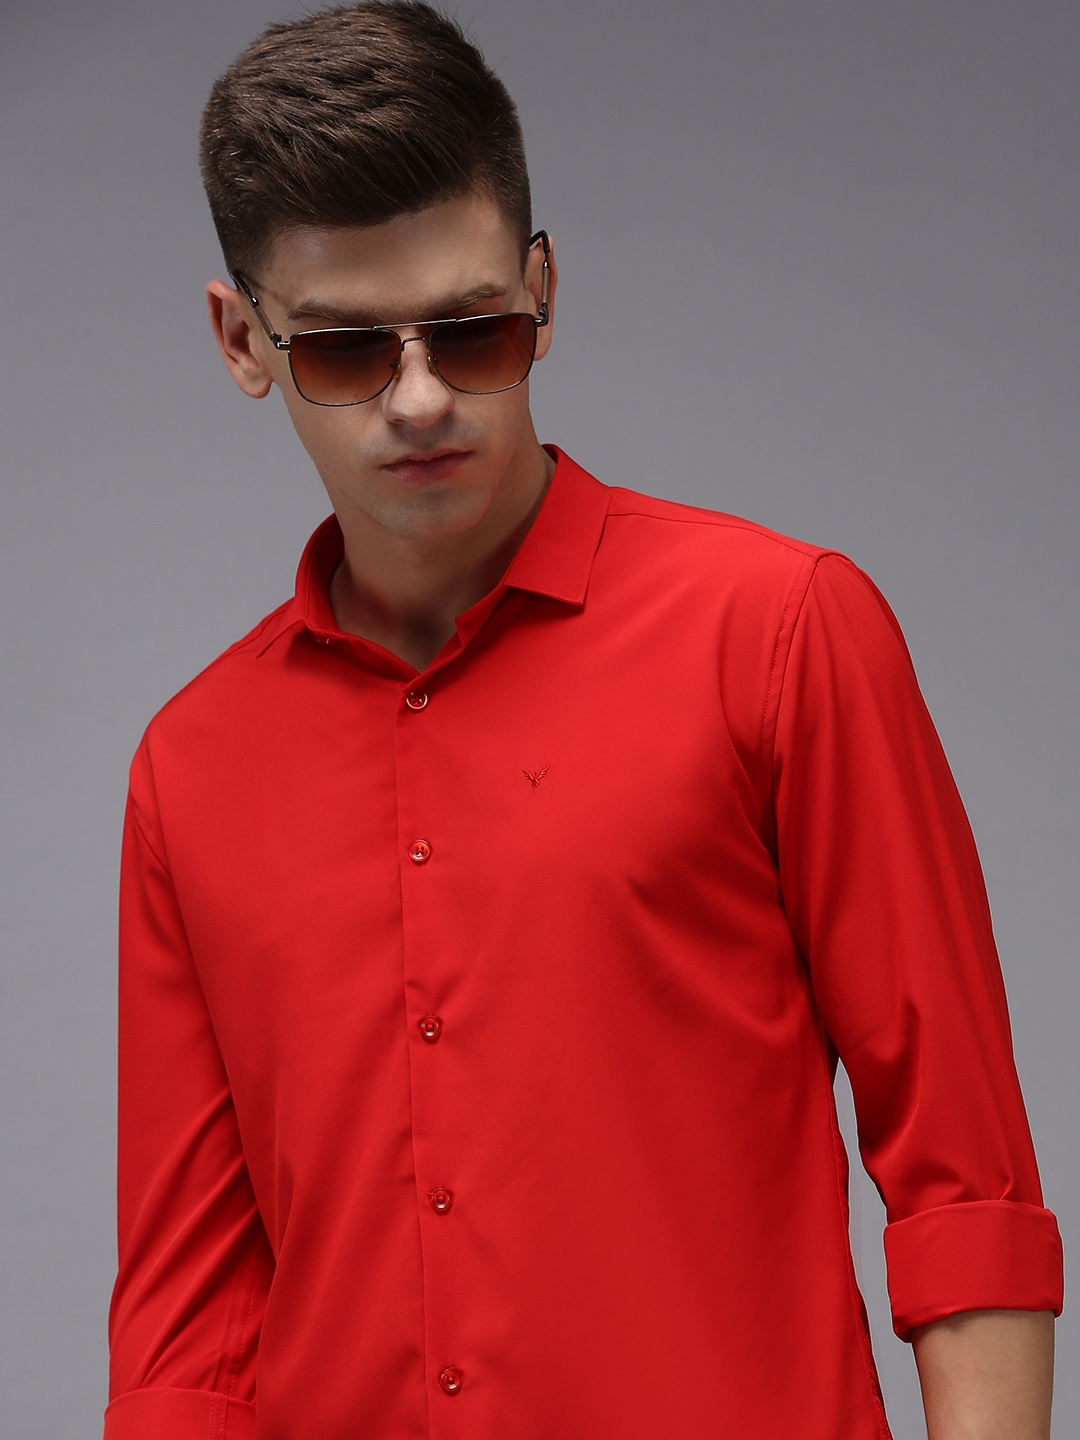 Men's Red Polyester Solid Casual Shirts